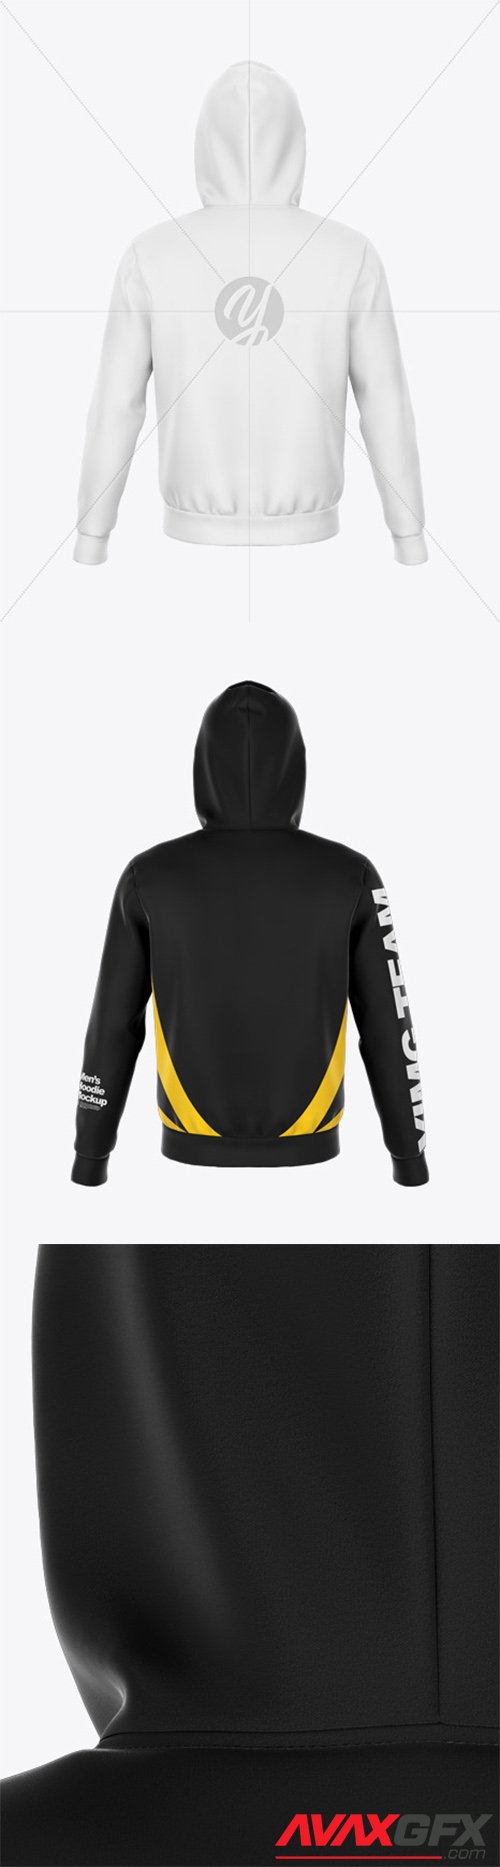 Hoodie Mockup - Back View 47625 » AVAXGFX - All Downloads ...